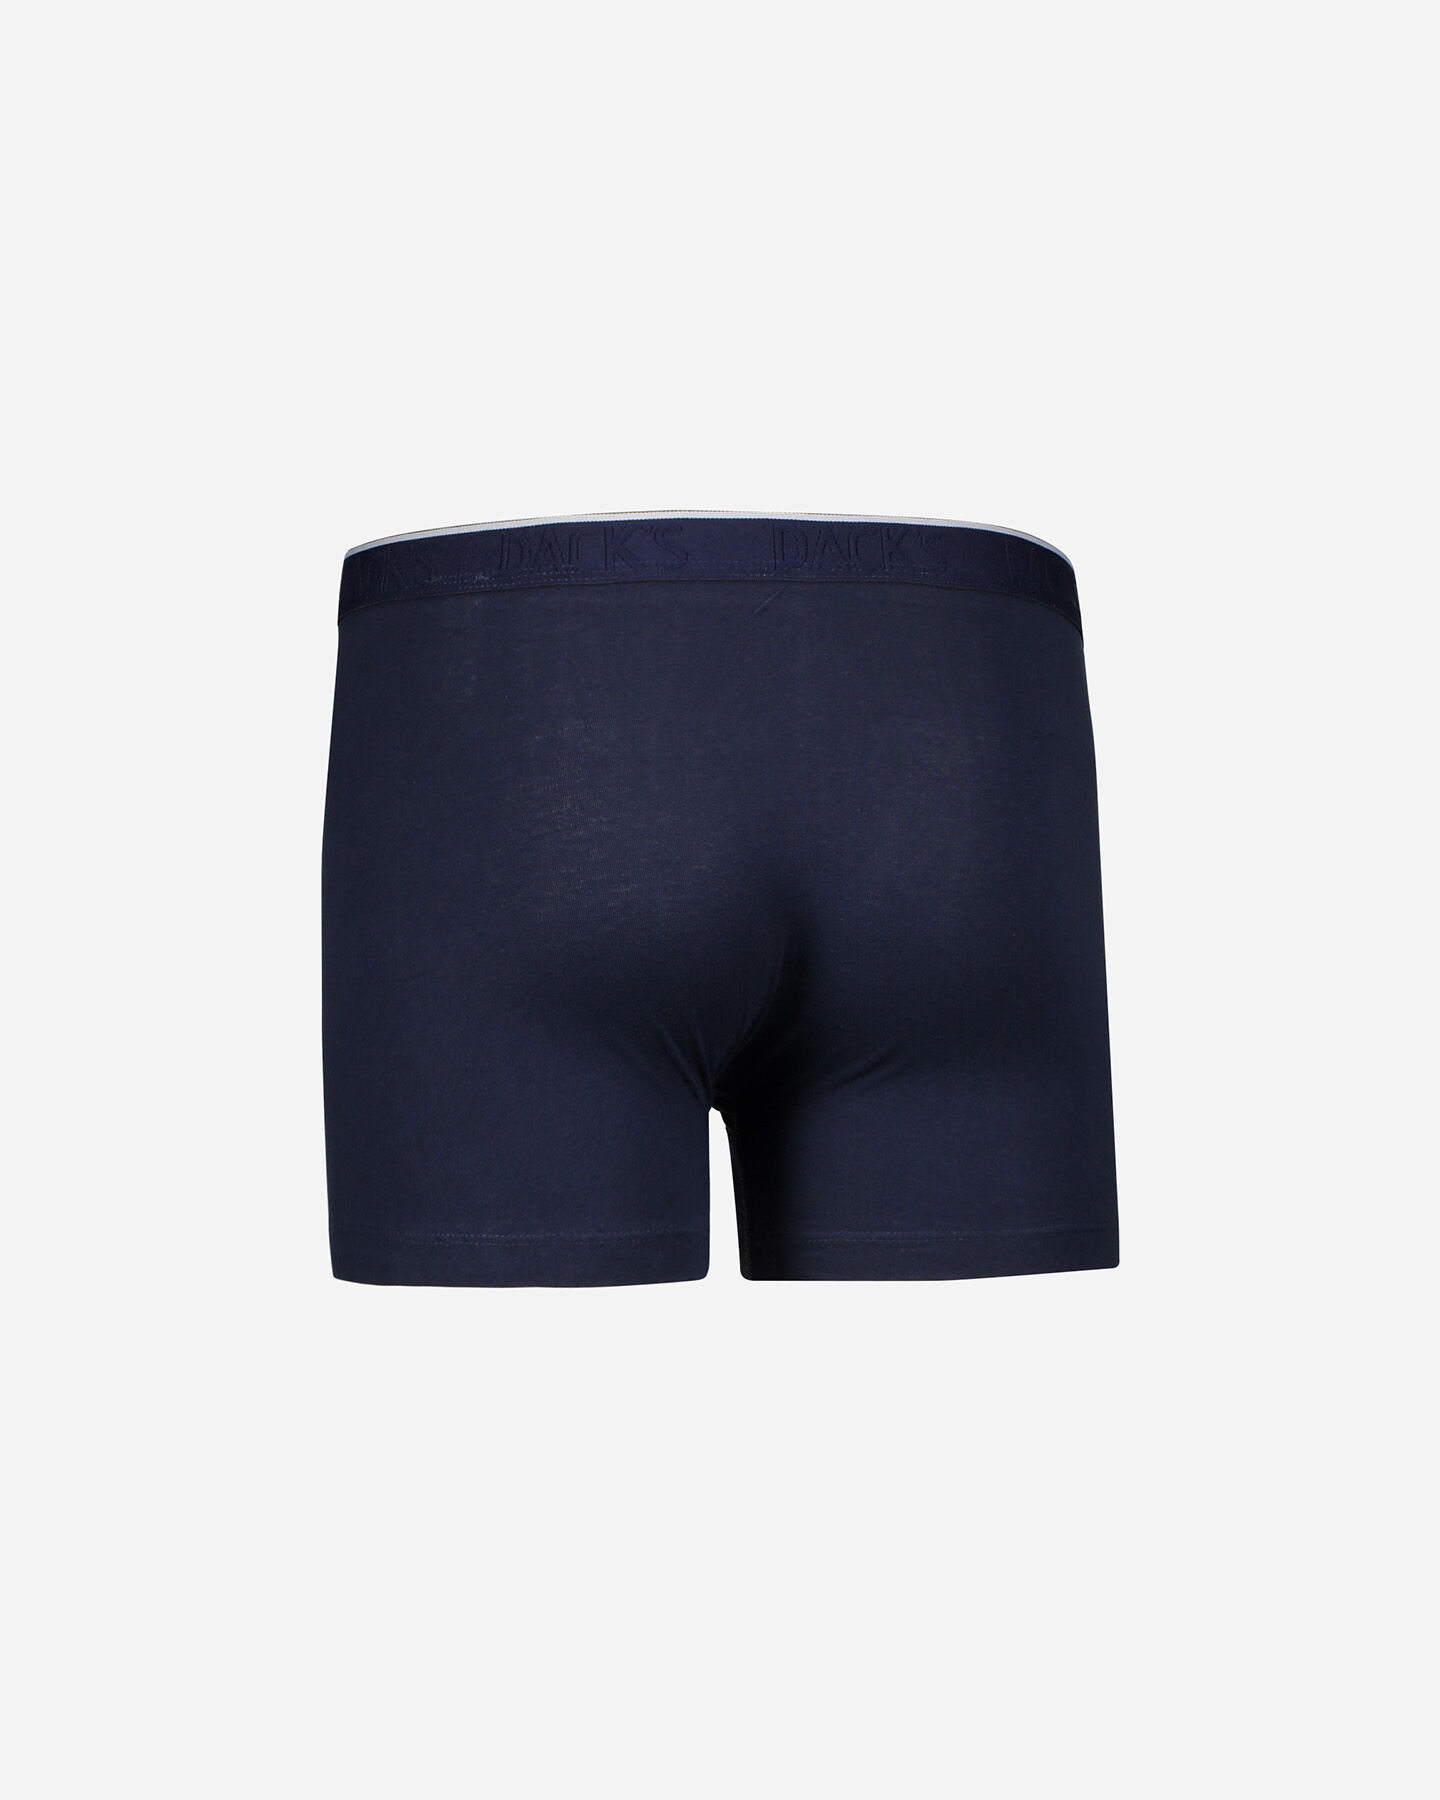  Intimo DACK'S BIPACK BASIC BOXER M S4061964|519/001|XL scatto 4